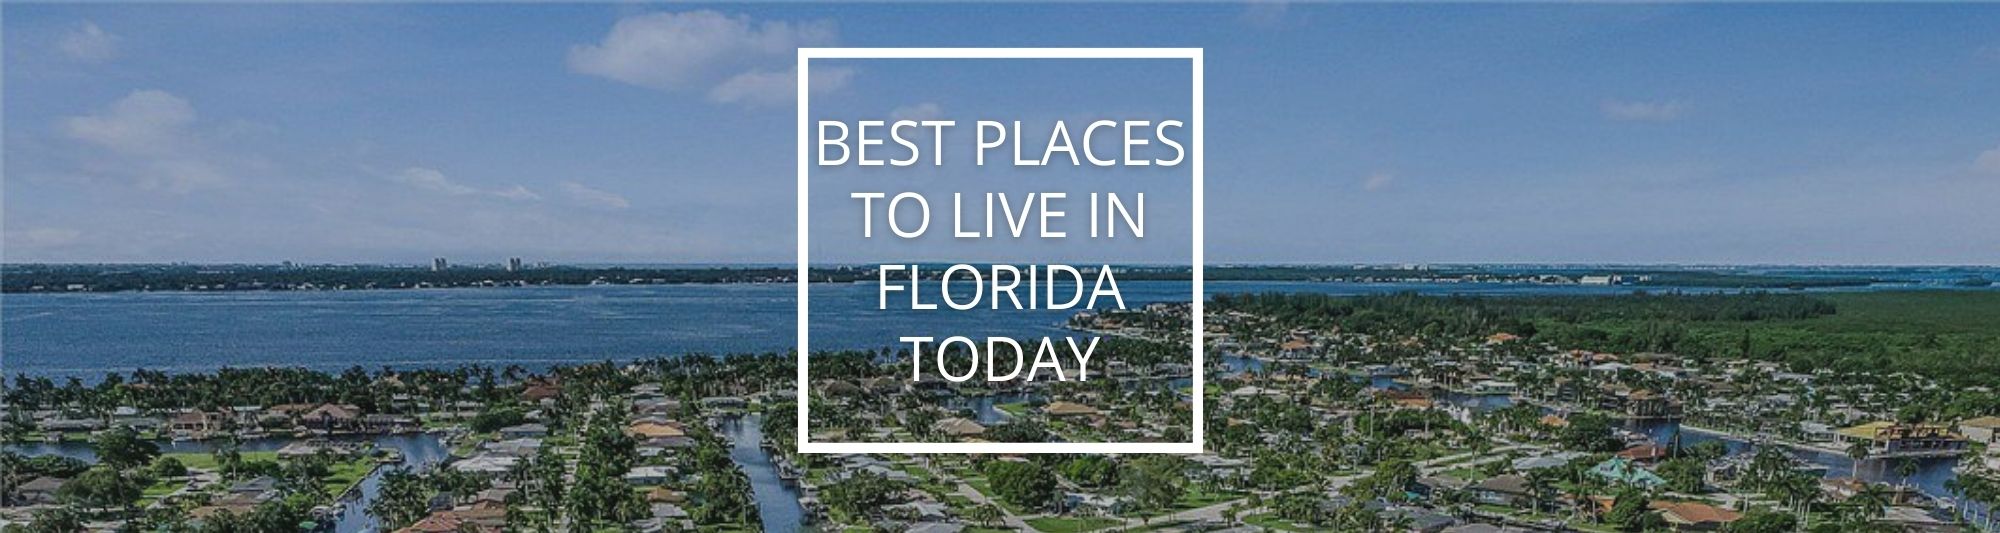 Best places to live in Florida Banner